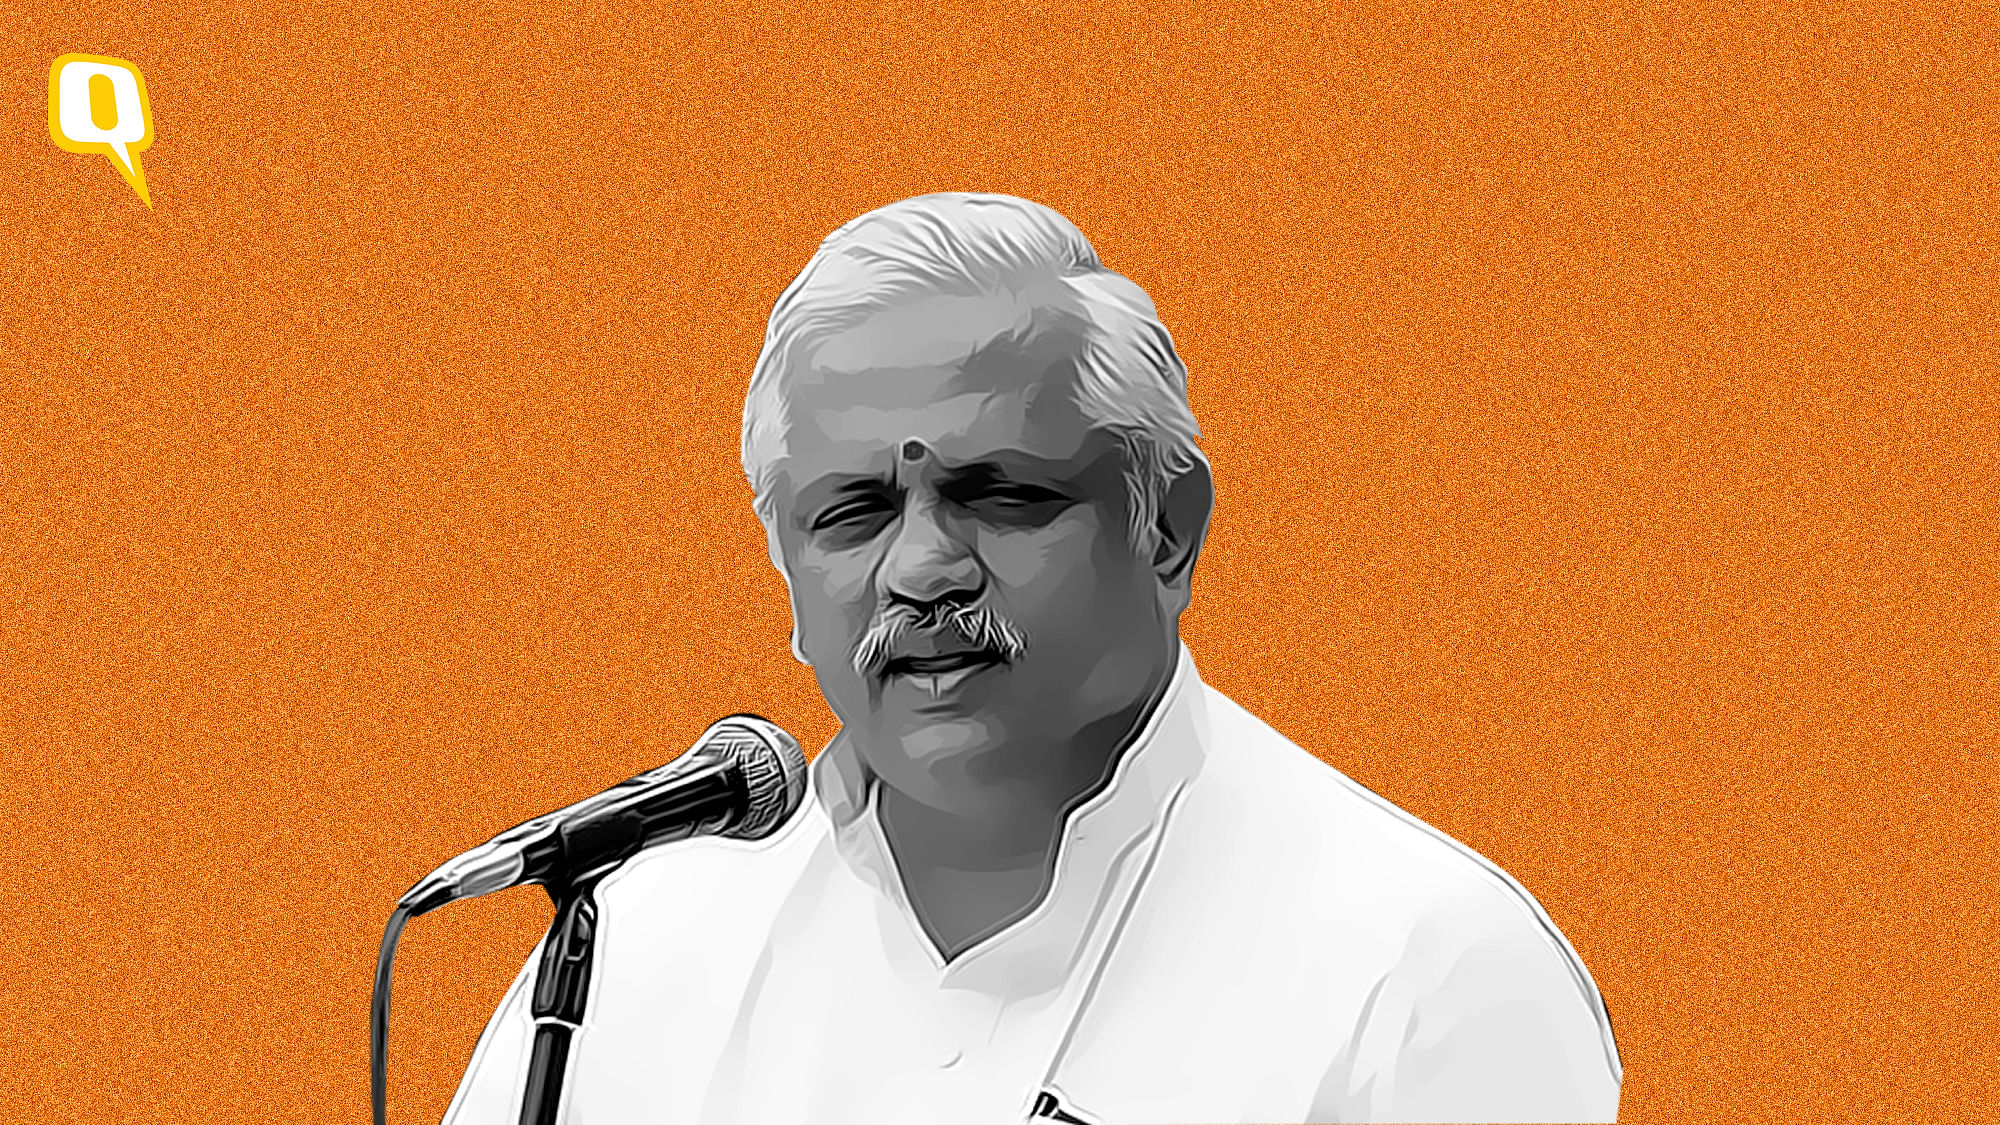 This RSS loyalist has emerged as a power centre within the Karnataka BJP and is clearly a force to reckon with